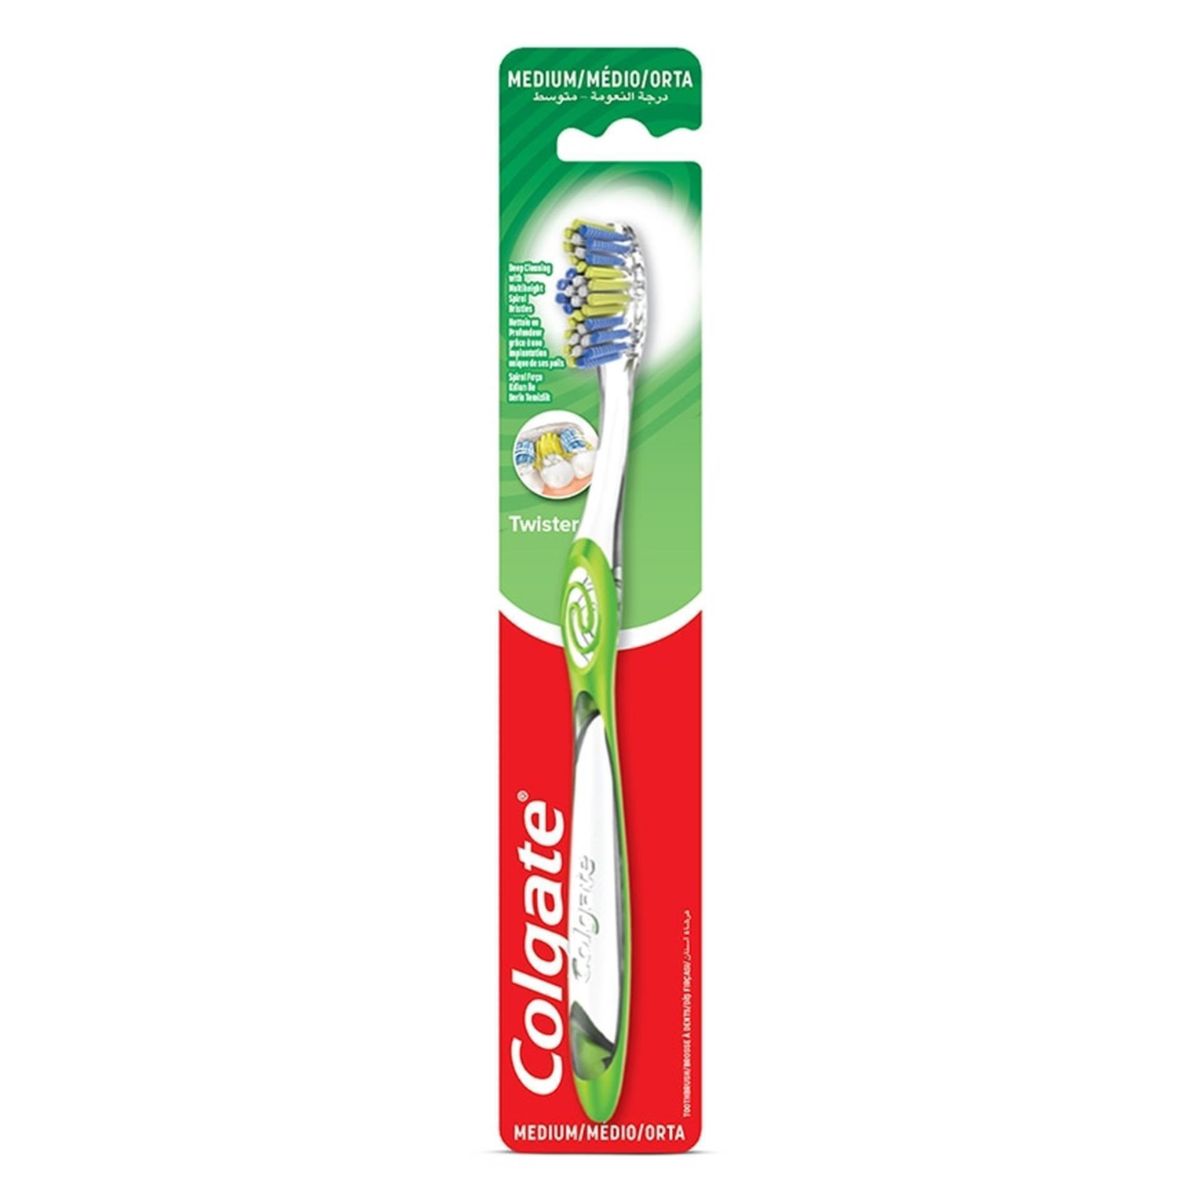 A Colgate - Twisted Toothbrush - 1pcs in a package.